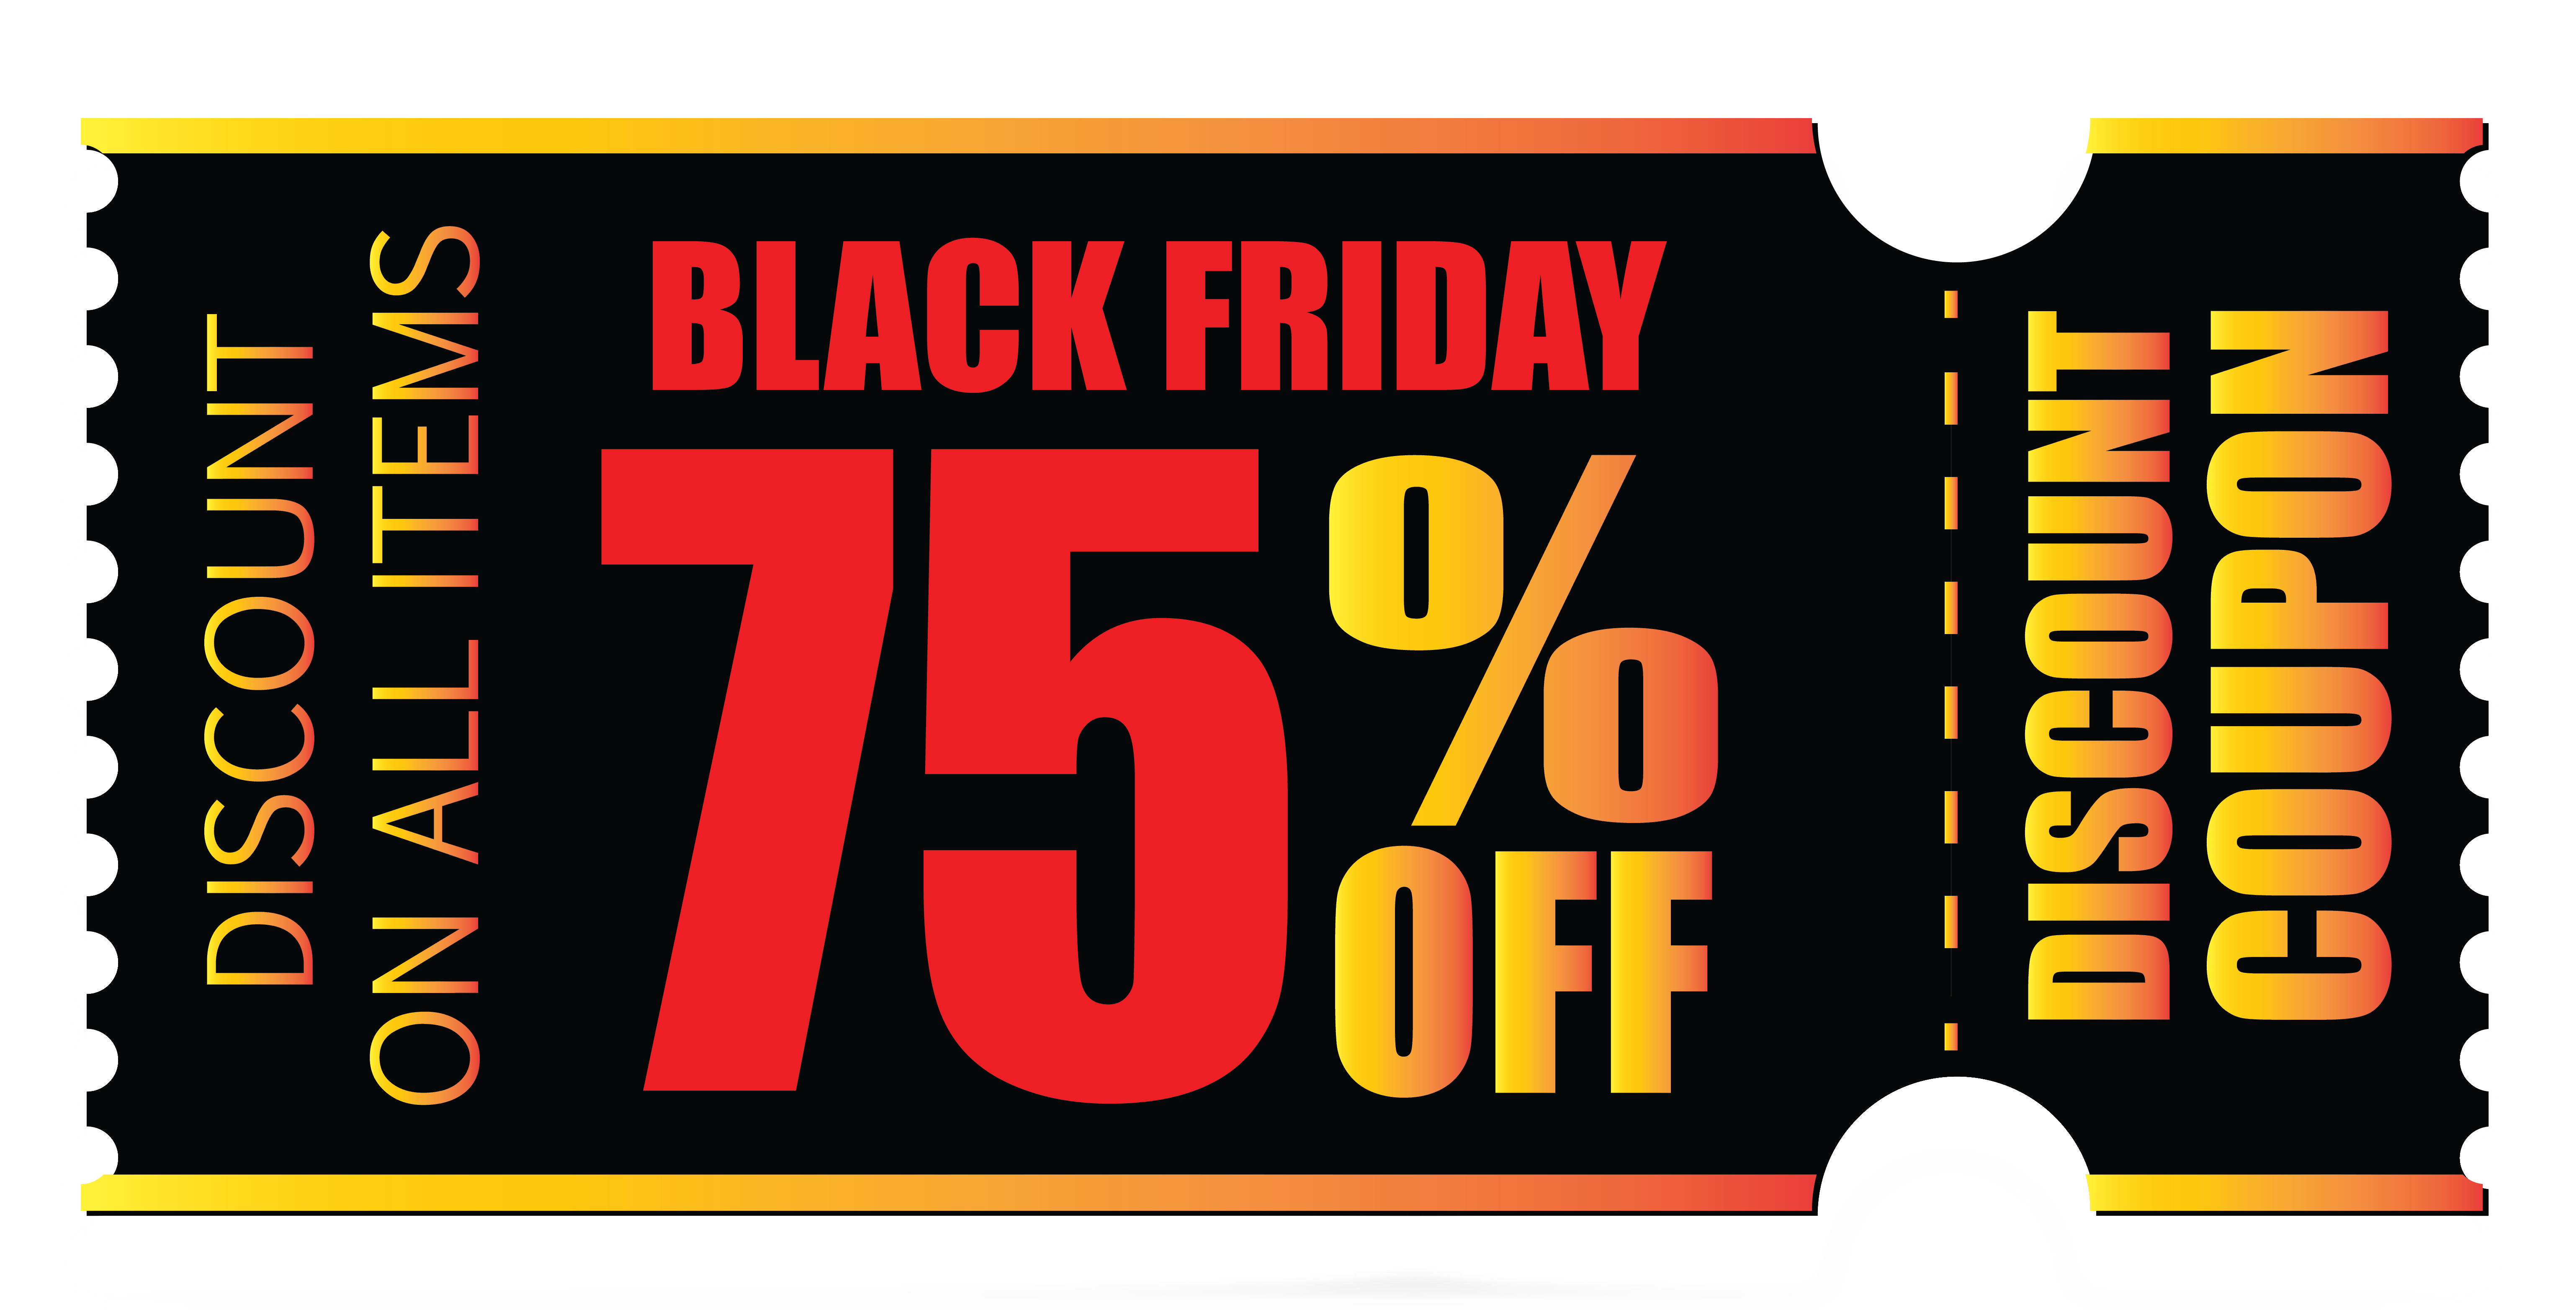 Download Black Friday Coupon PNG Clipart Image | Gallery Yopriceville - High-Quality Images and ...